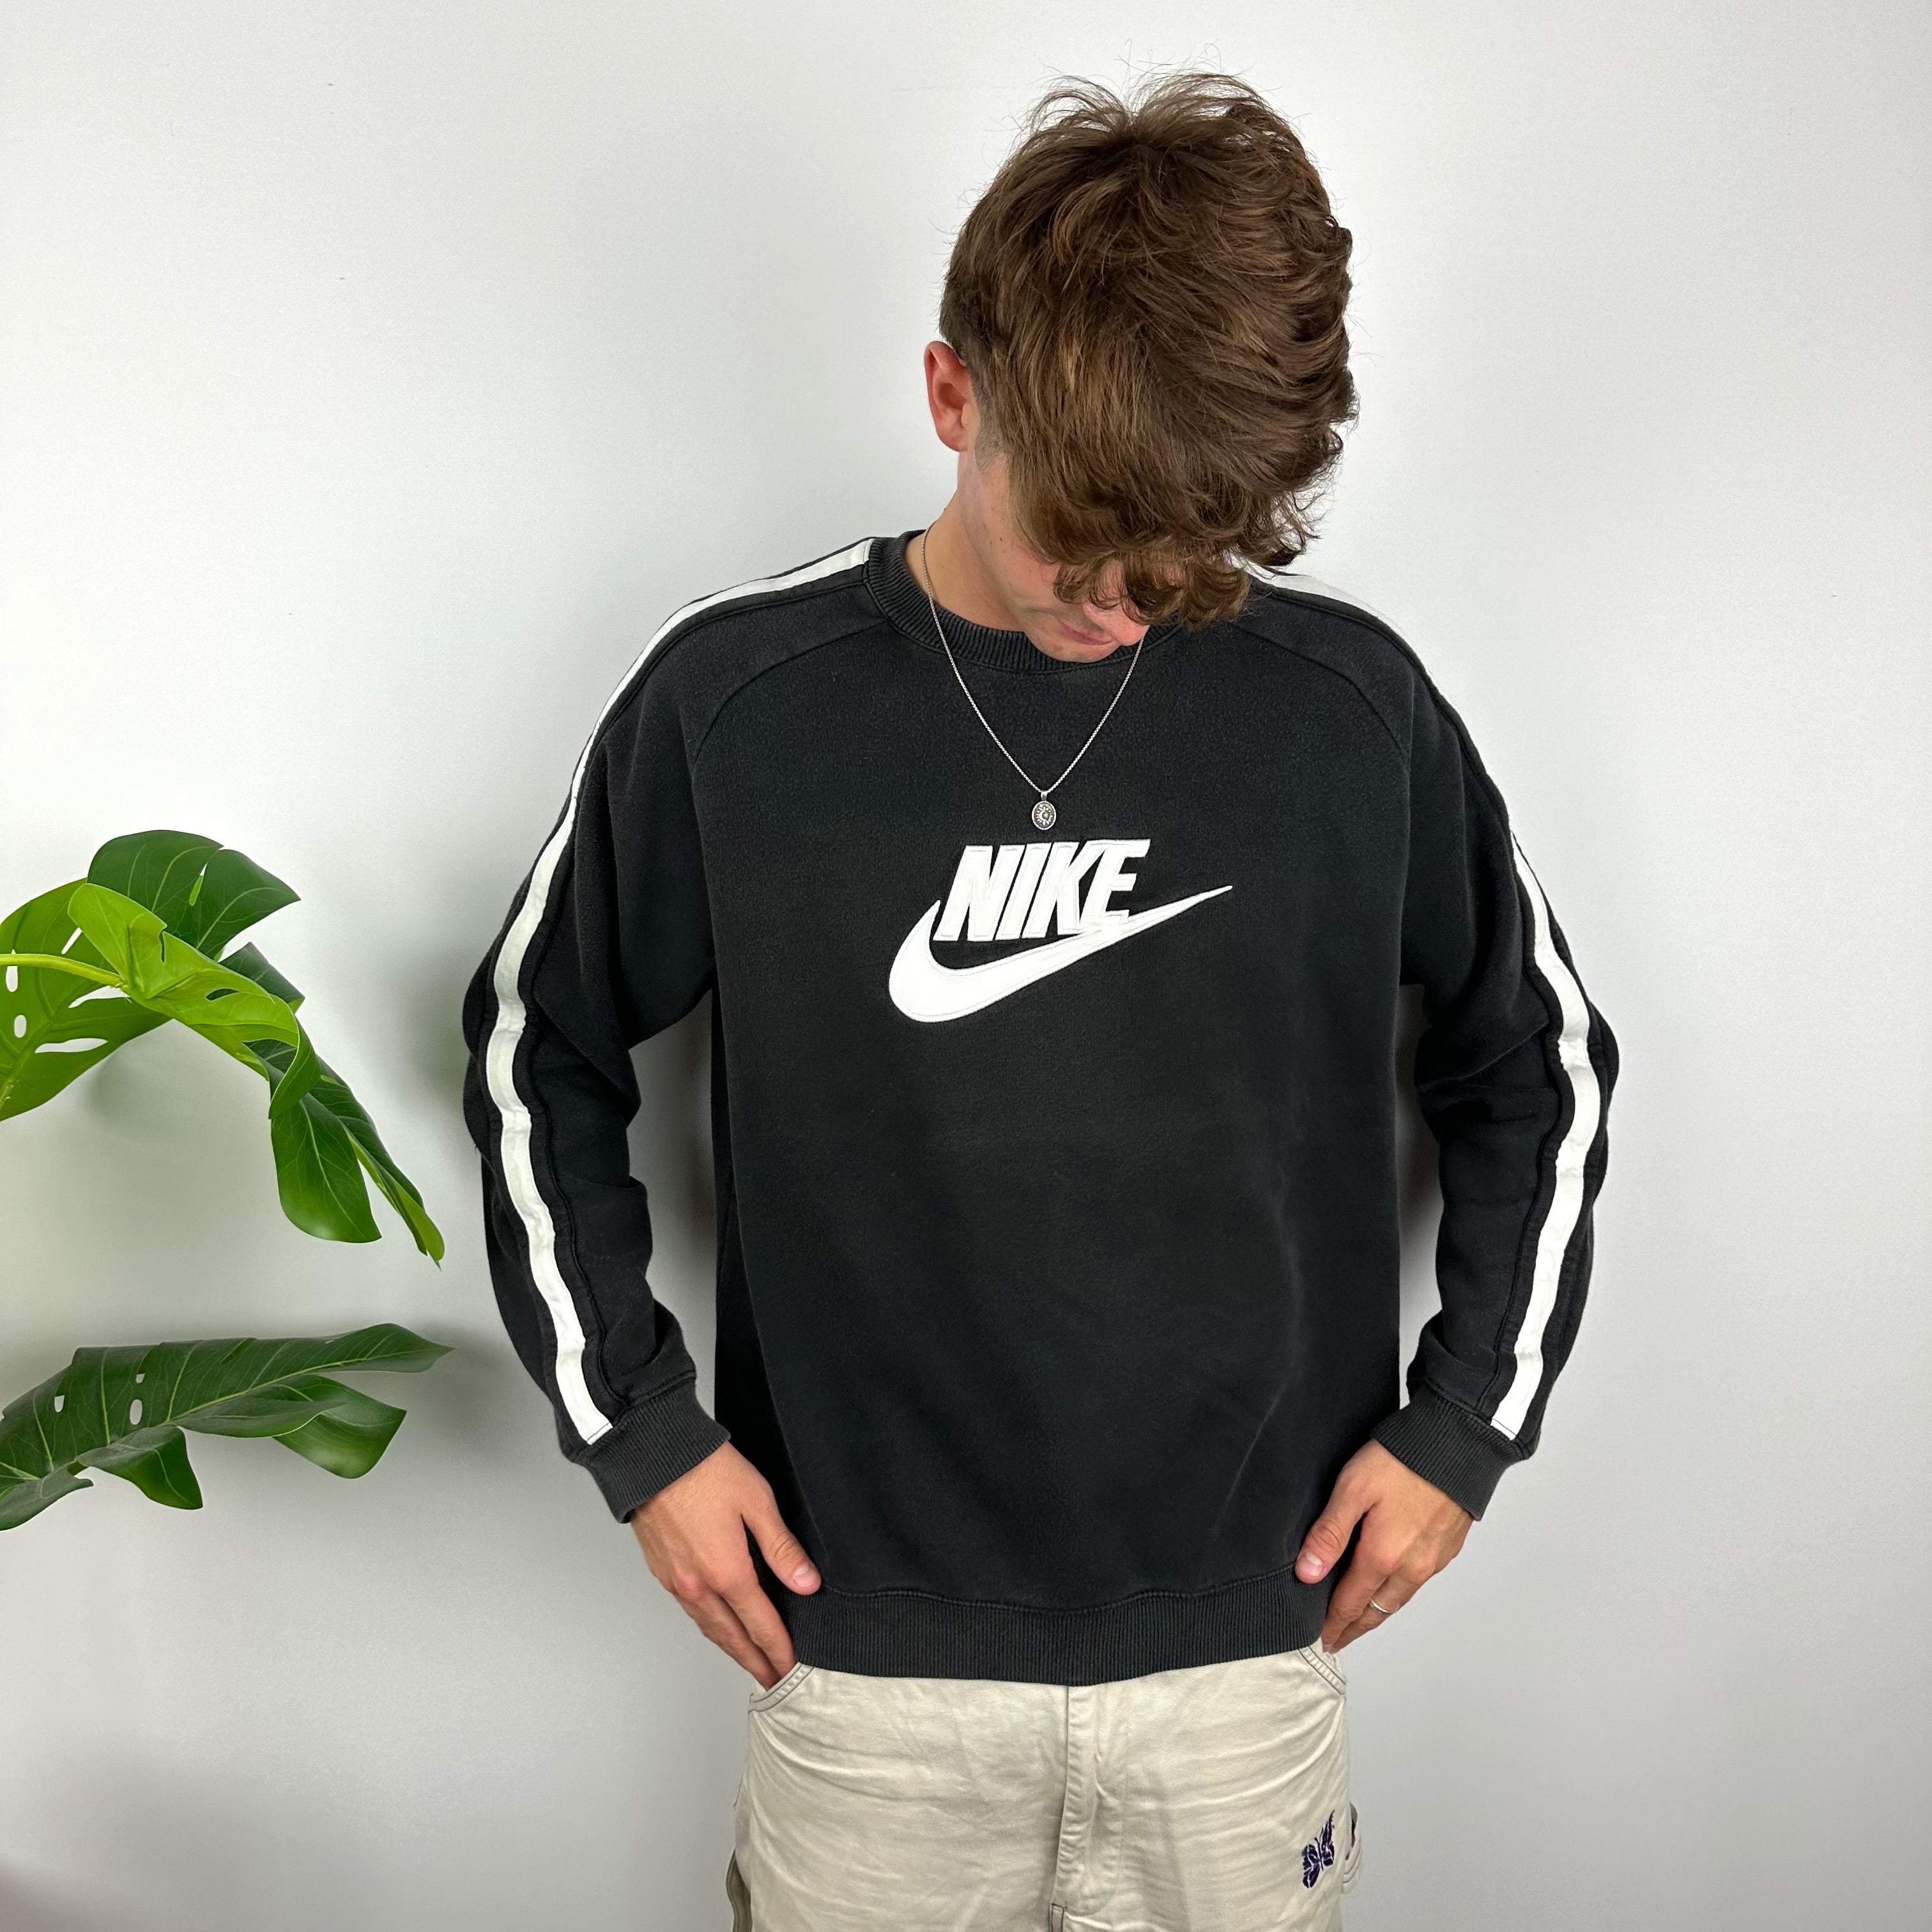 Nike RARE Black Embroidered Spell Out Sweatshirt (L)